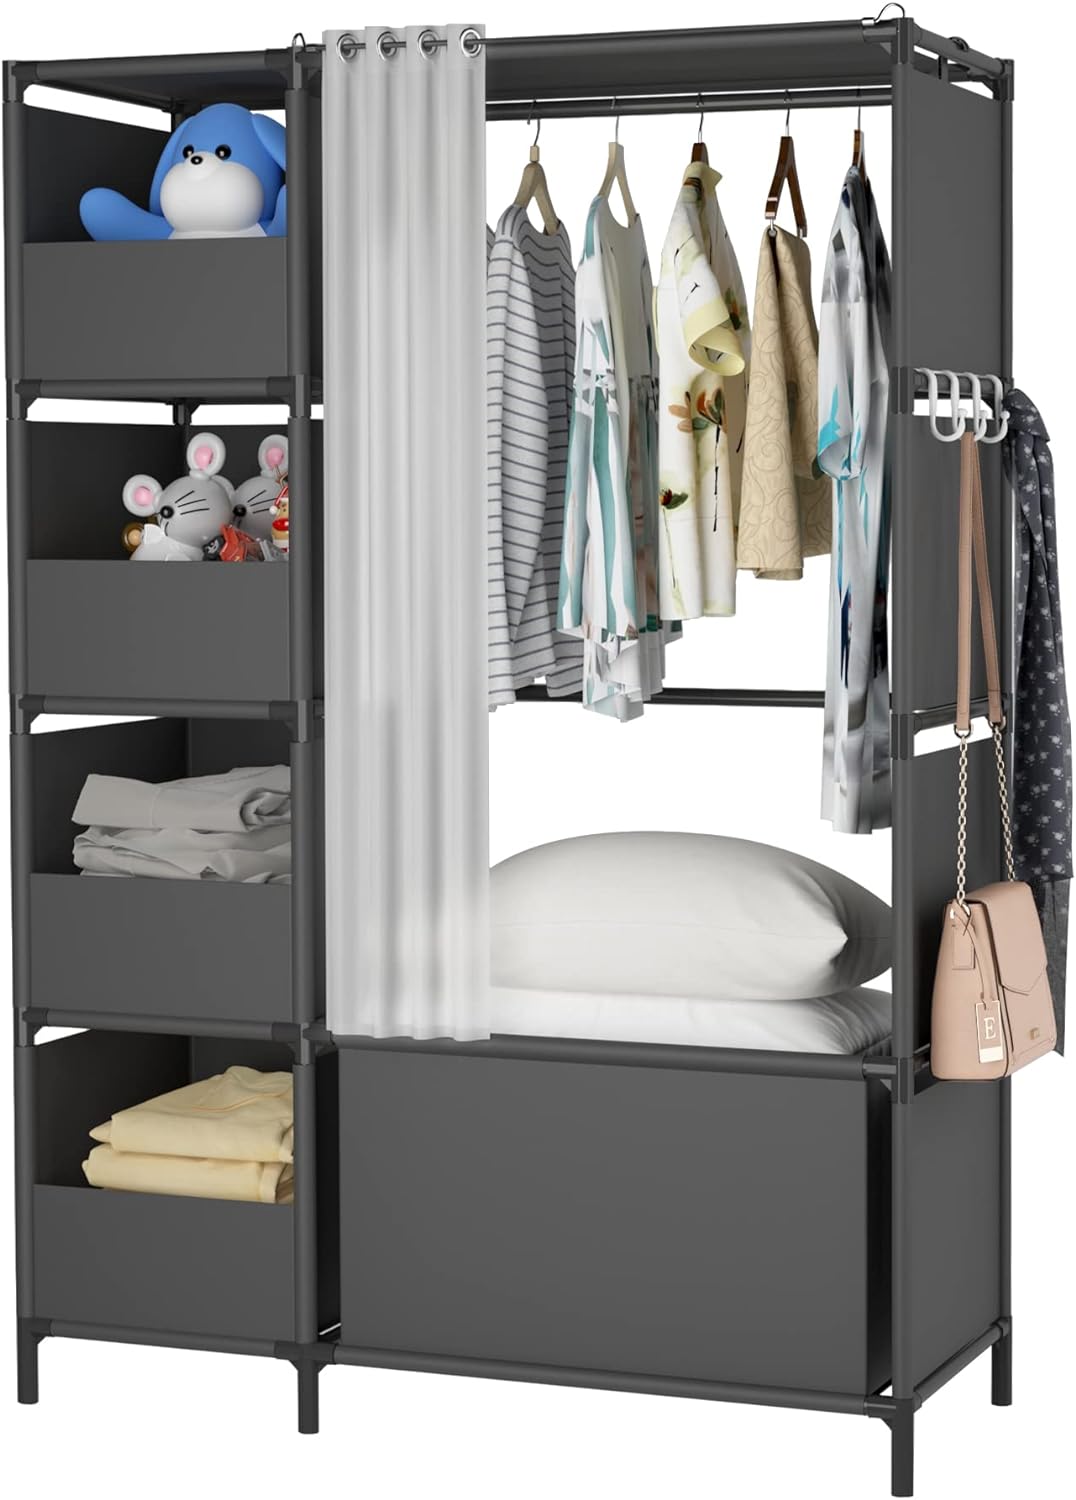 Portable Wardrobe Storage Closet, Clothes Storage Cabinet with Curtain, for Living Room, Bedroom, Clothes Room, Black40.55 x 16.73 x 65.35Inches